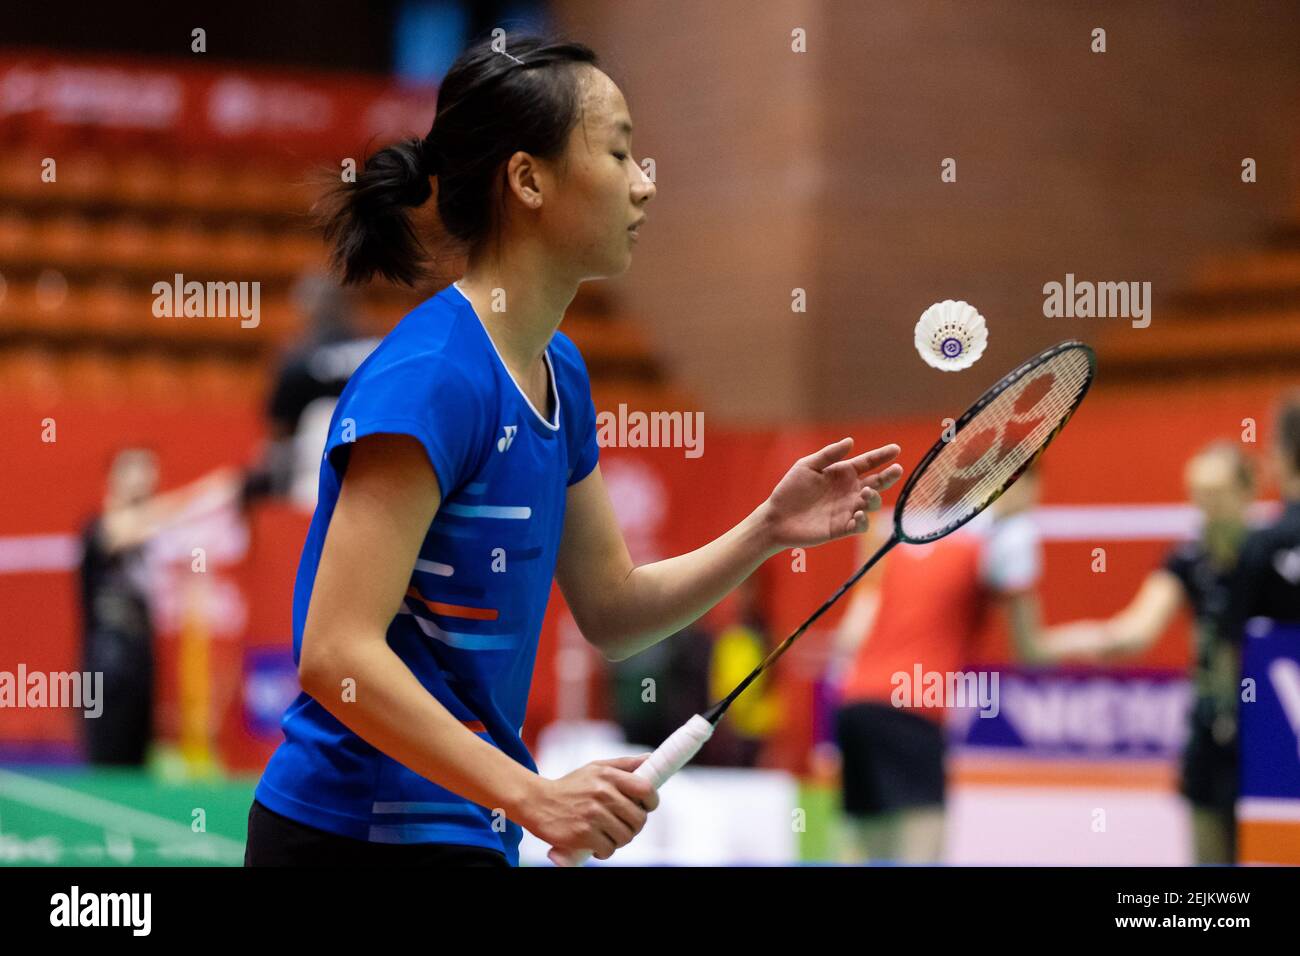 Irina Amalie Andersen of Denmark competes in the Women's Singles  qualification Round 1 match against Iris Wang of USA on day two of the  Barcelona Spain Master at Vall d'Hebron Olympic Sports